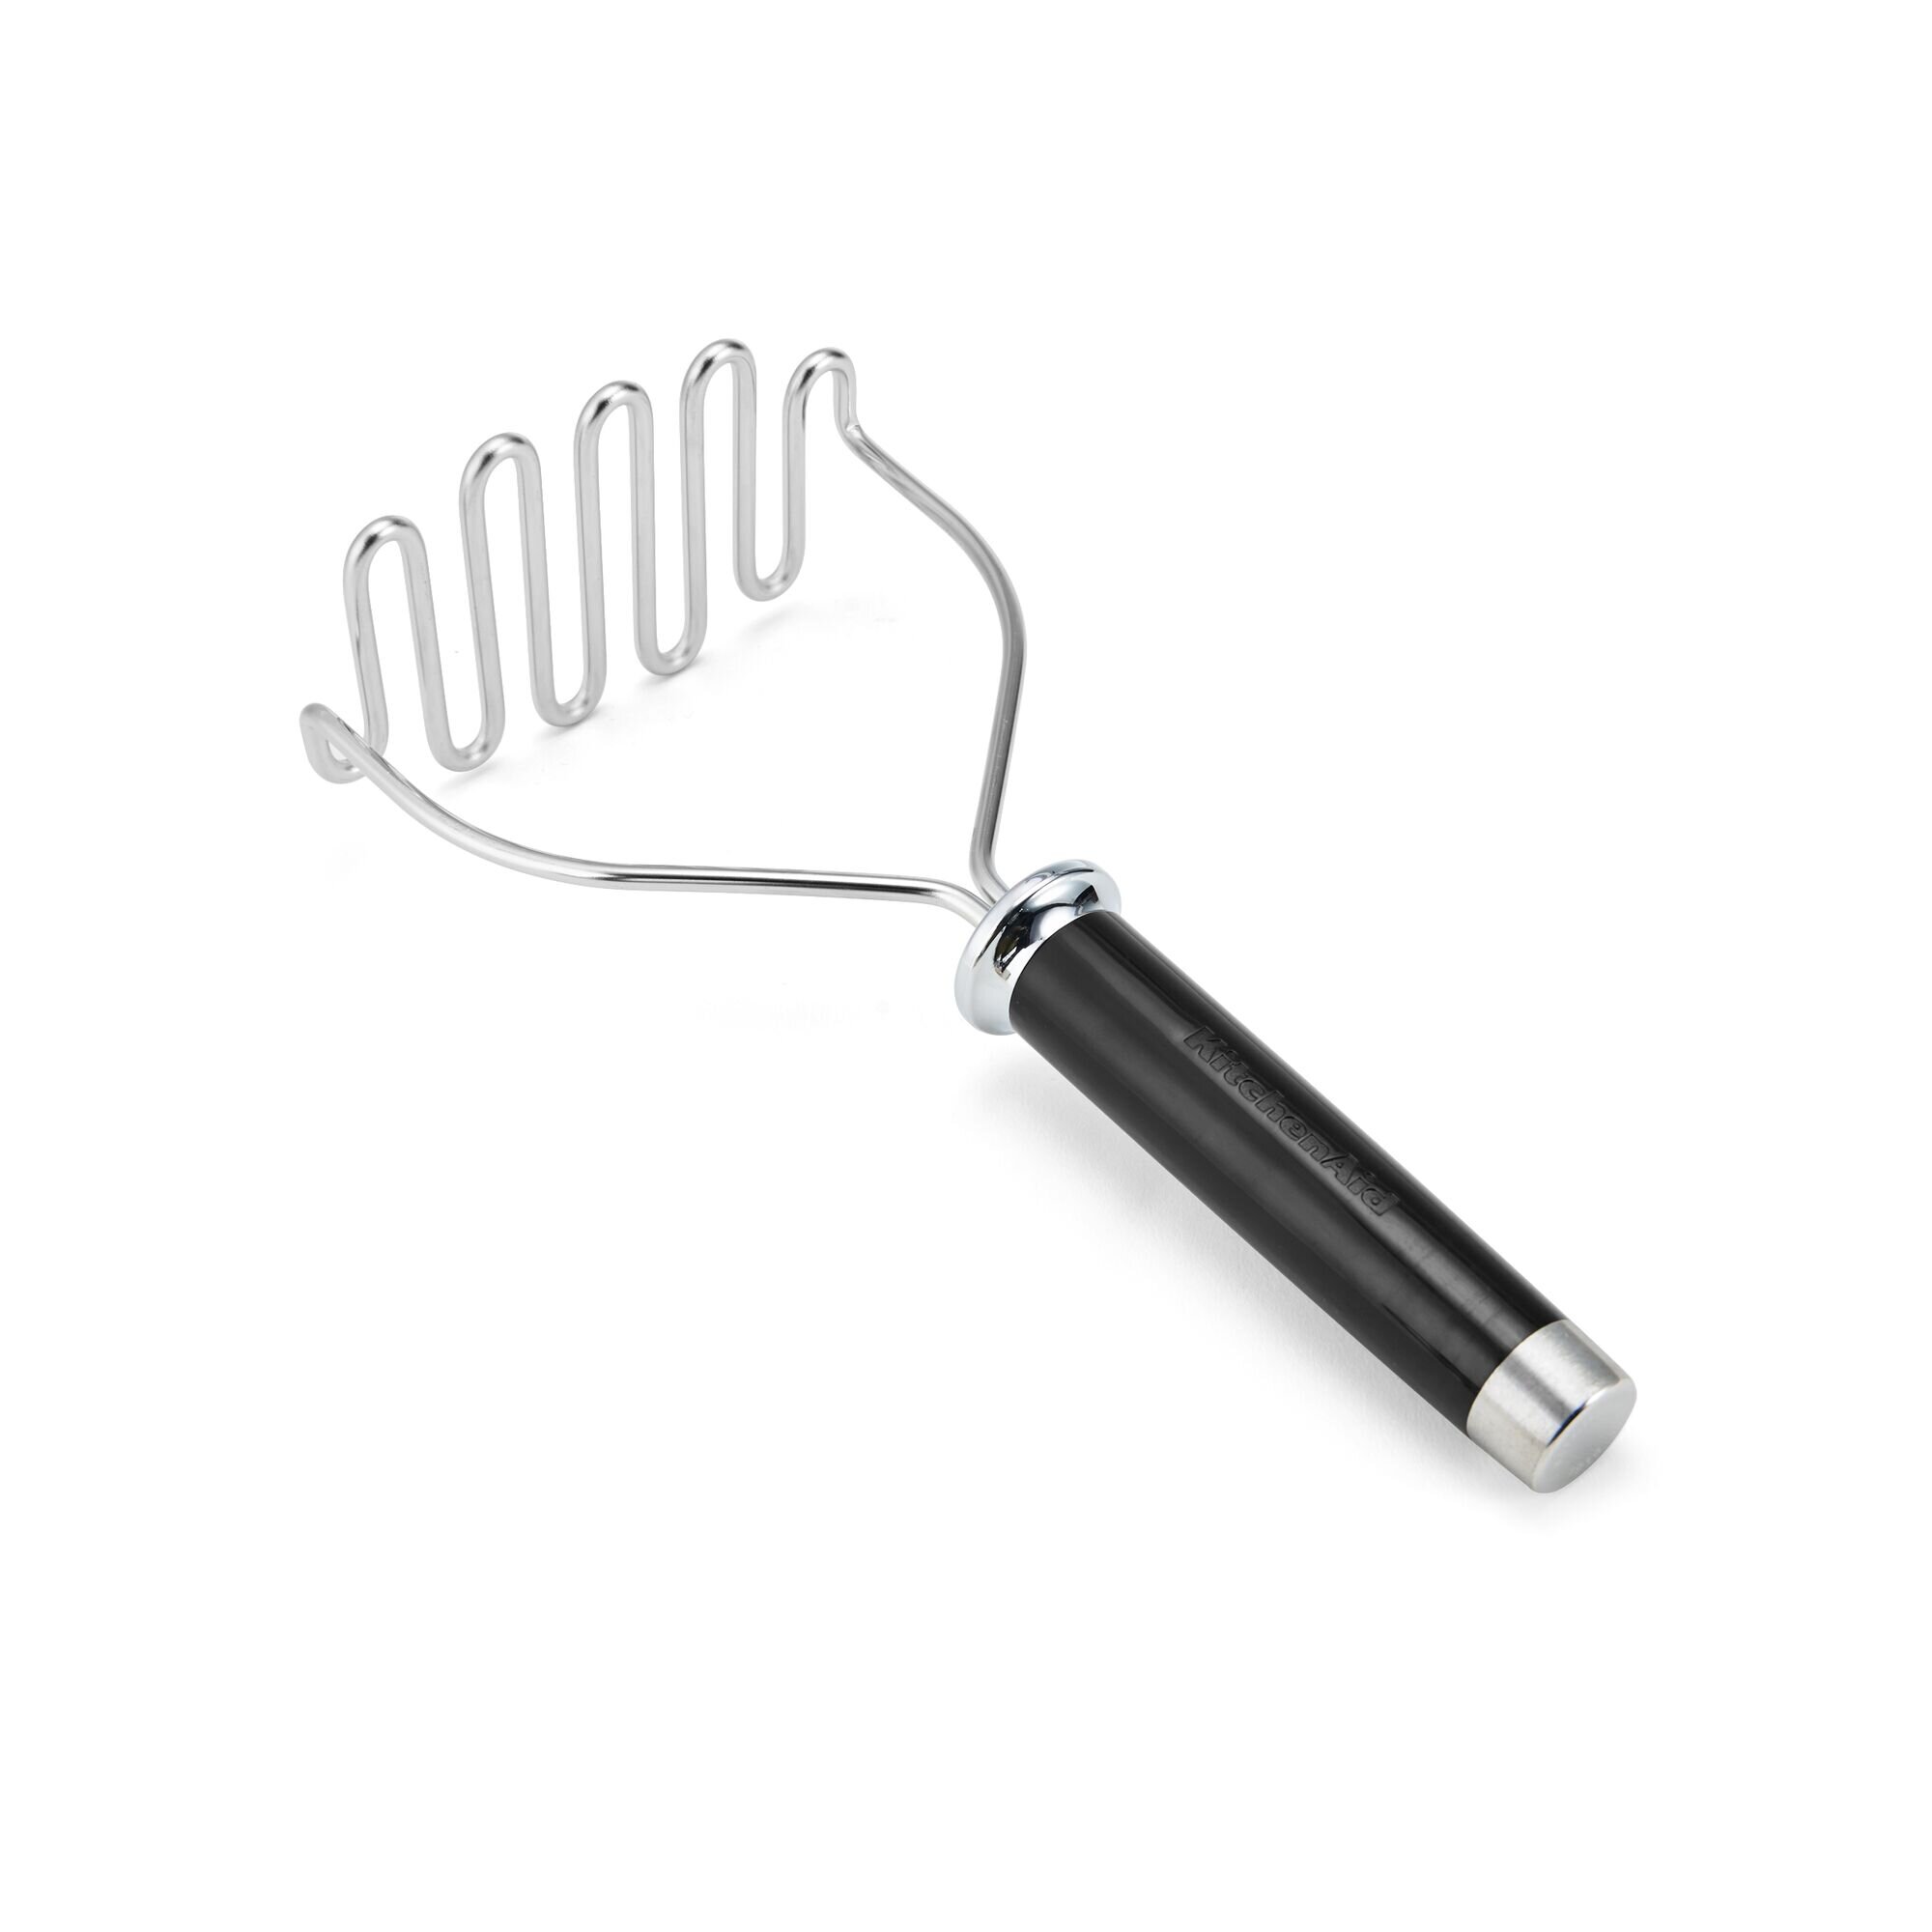 Farberware Holiday Stainless Steel and Black Euro Peeler, Size: 20 oz